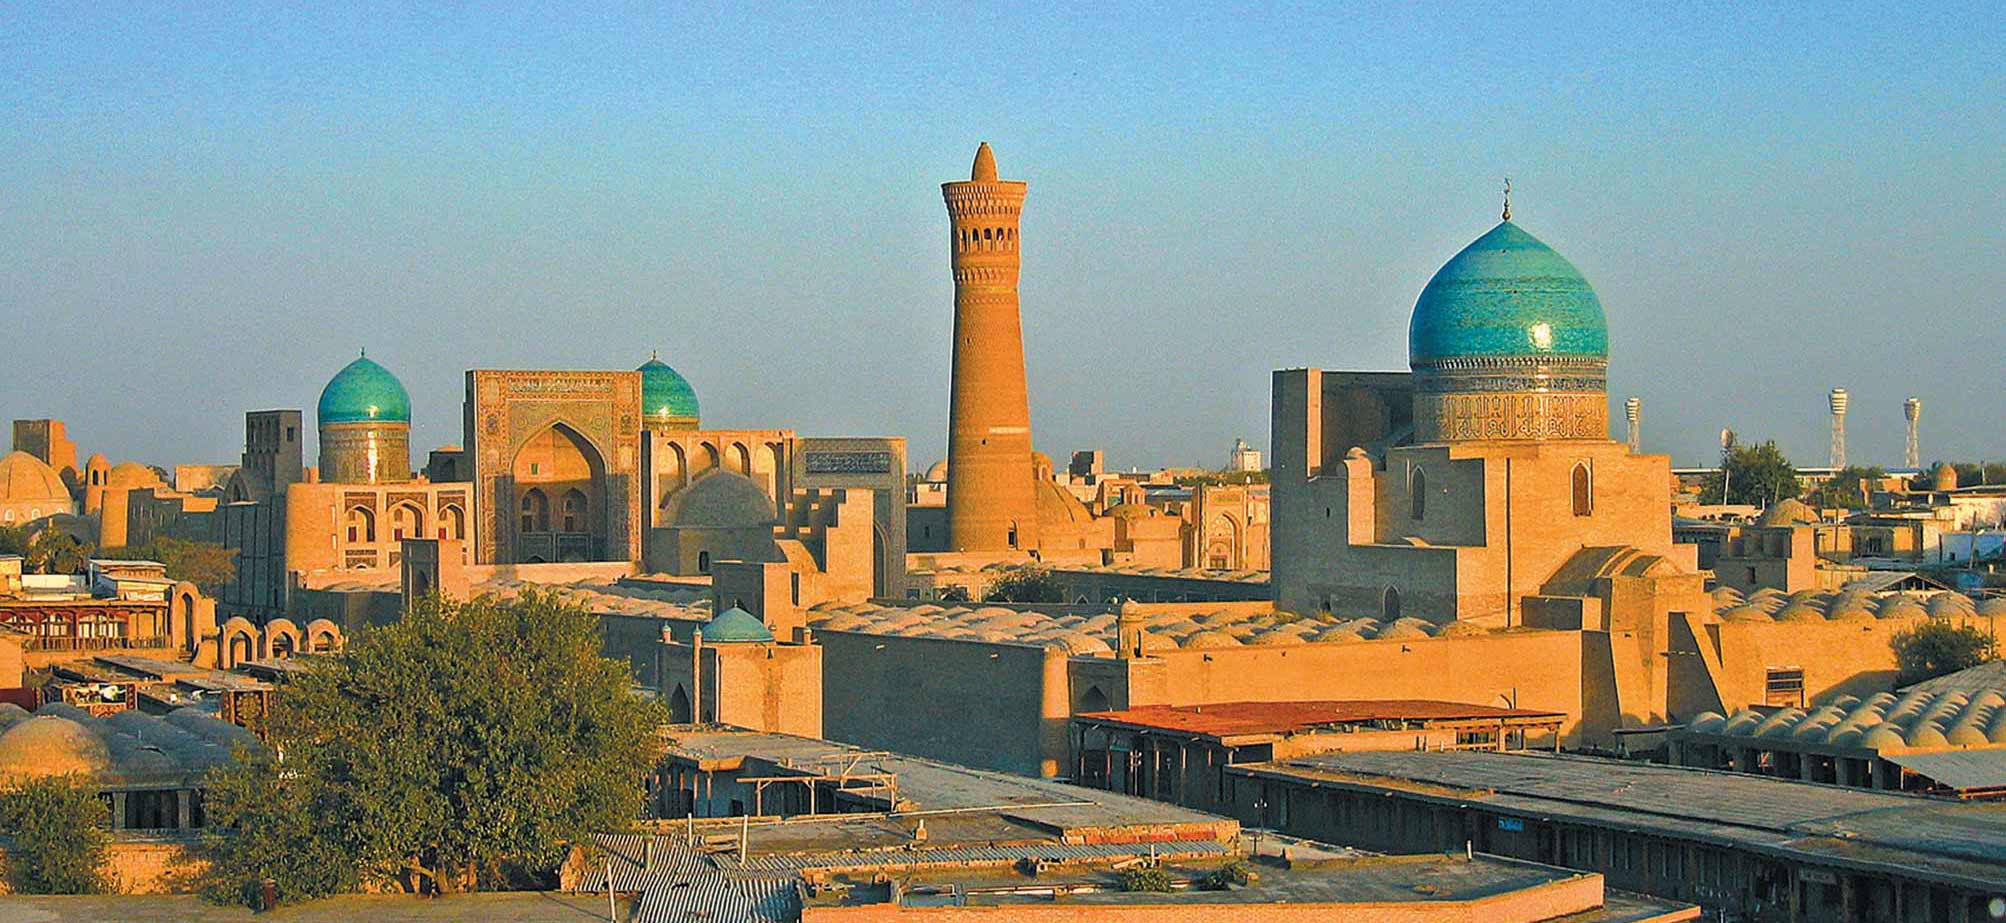 In Uzbekistan 2017 has been declared the Year of Dialogue with the People and Human Interests